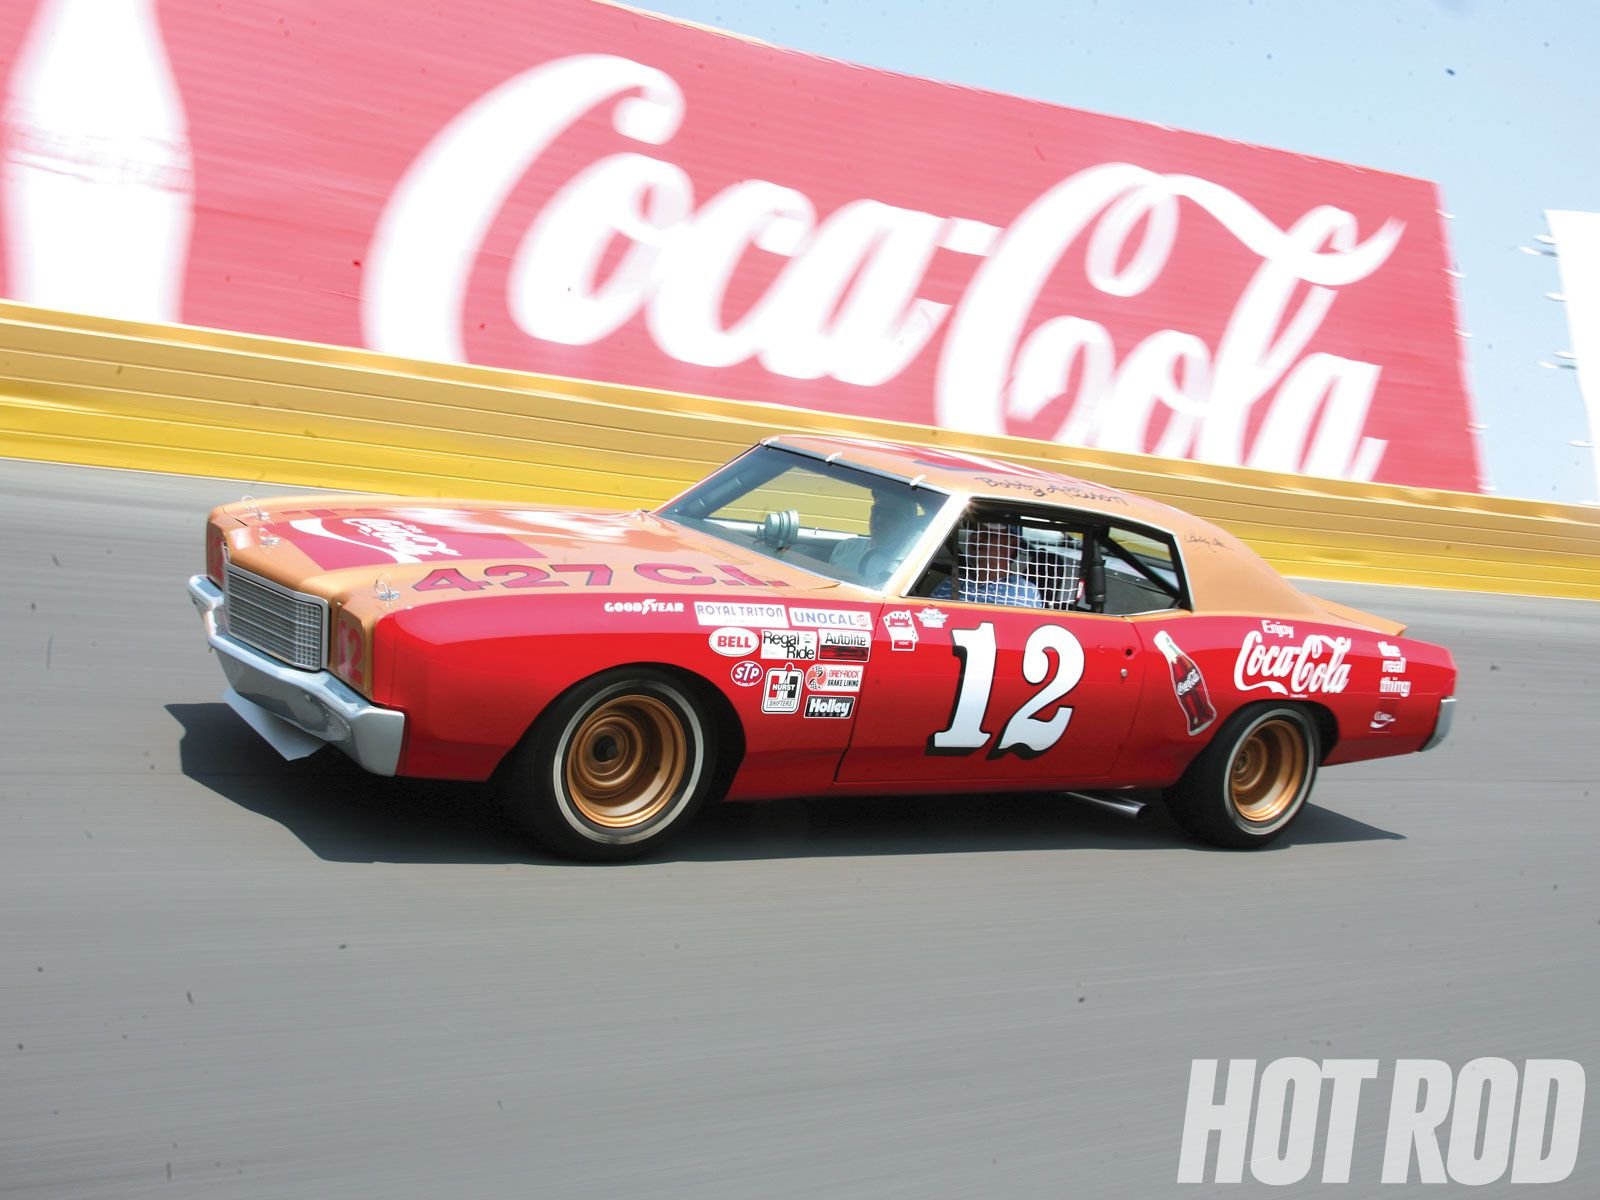 1972, Chevrolet, Monte, Carlo, Nascar, Hot, Rod, Rods, Muscle, Race, Racing, Classic Wallpaper